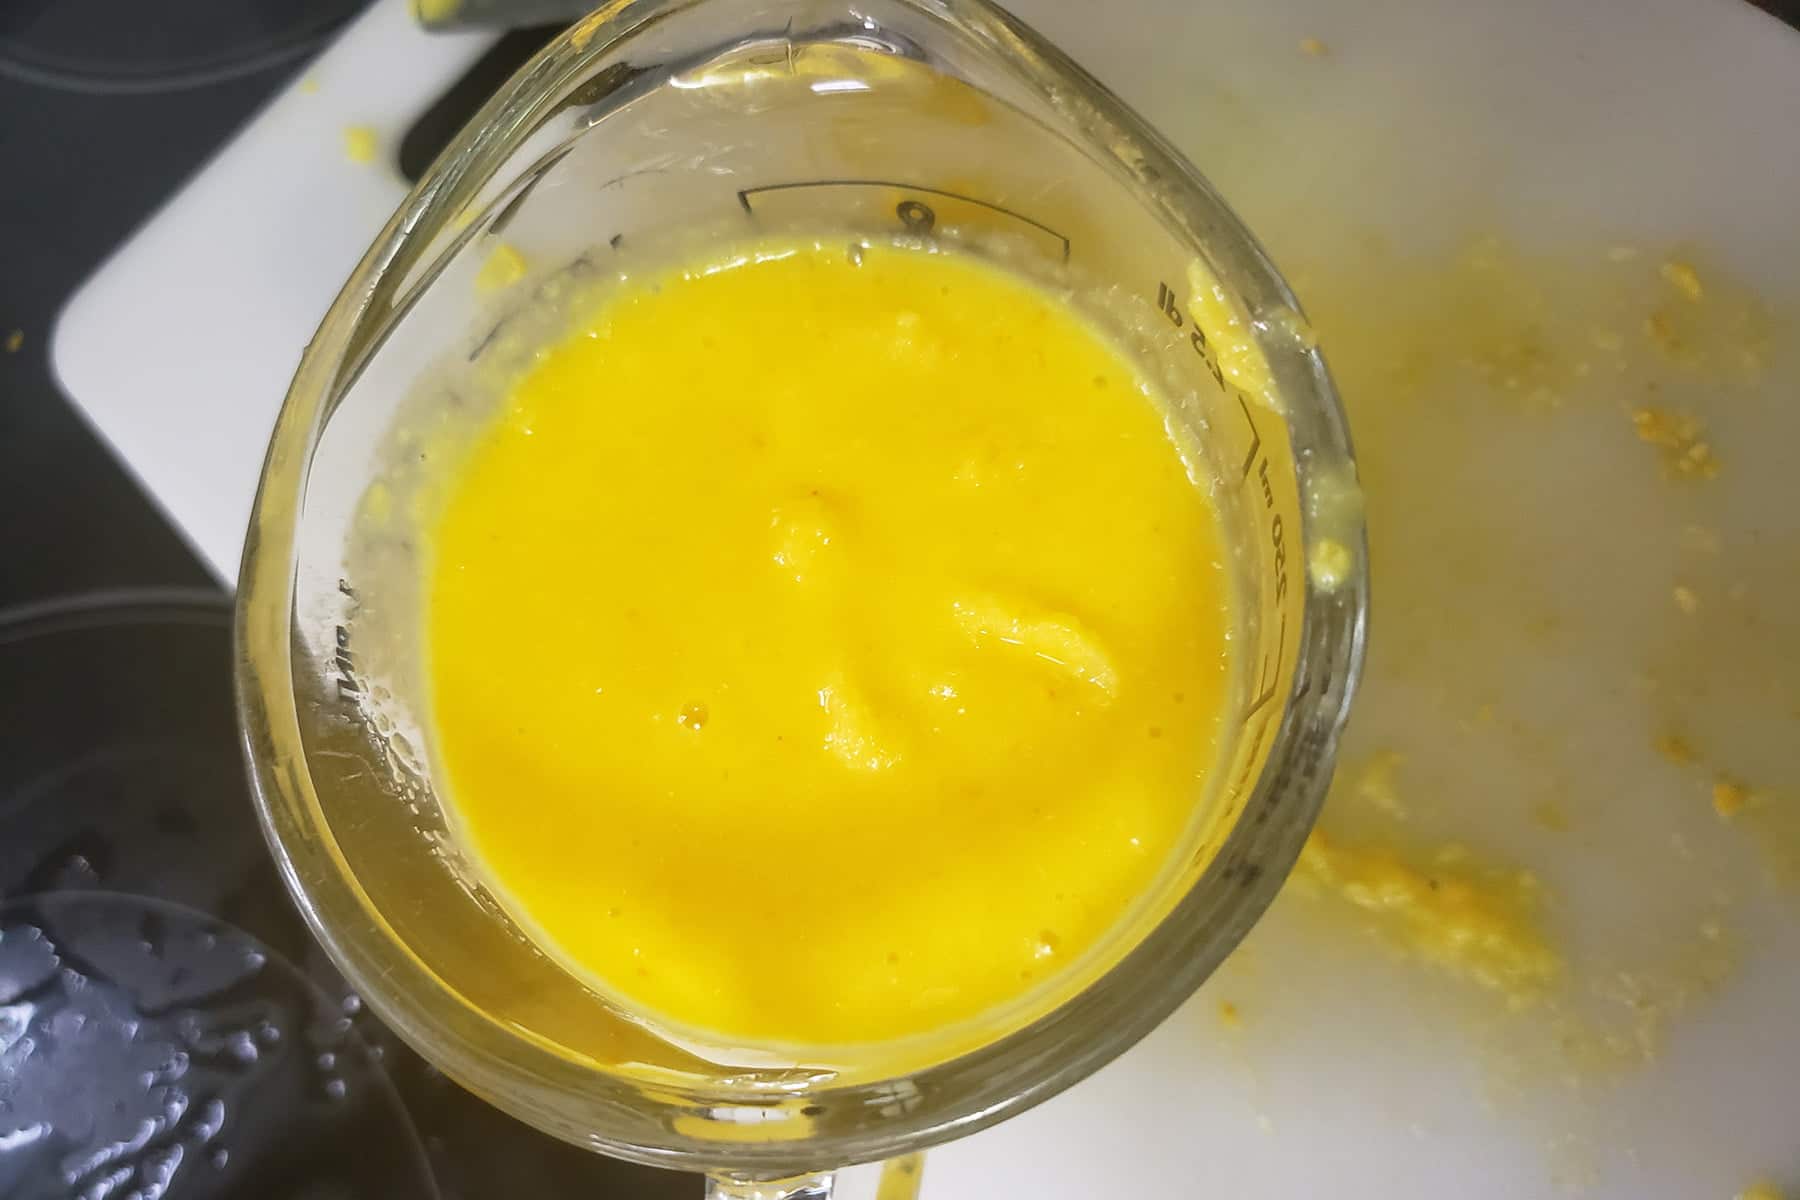 A glass measuring cup contains bright yellow-orange fruit pulp.